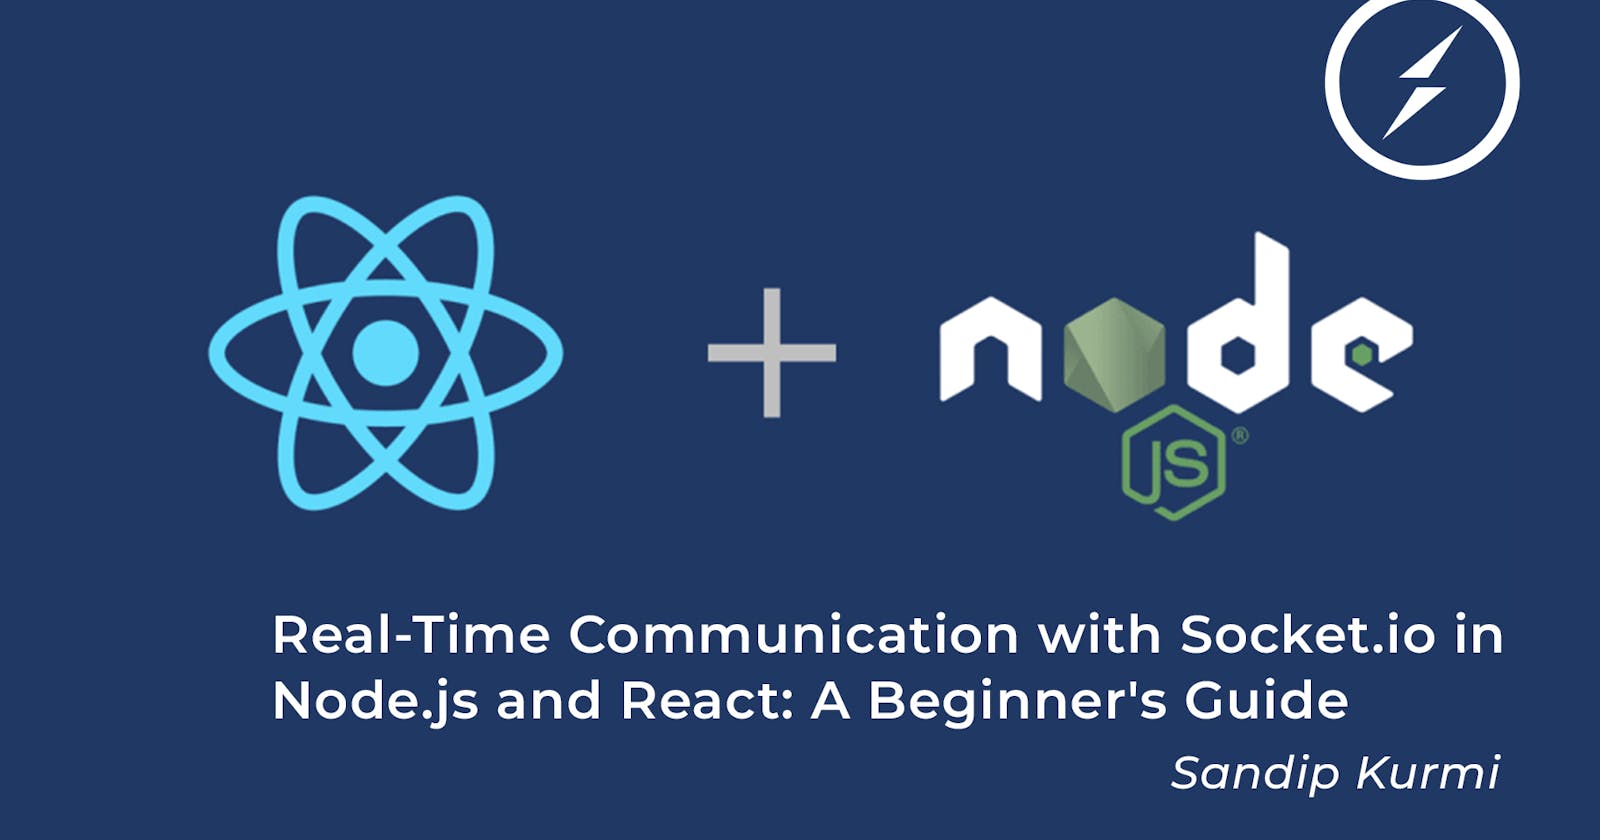 Real-Time Communication with Socket.io in Node.js and React: A Beginner's Guide